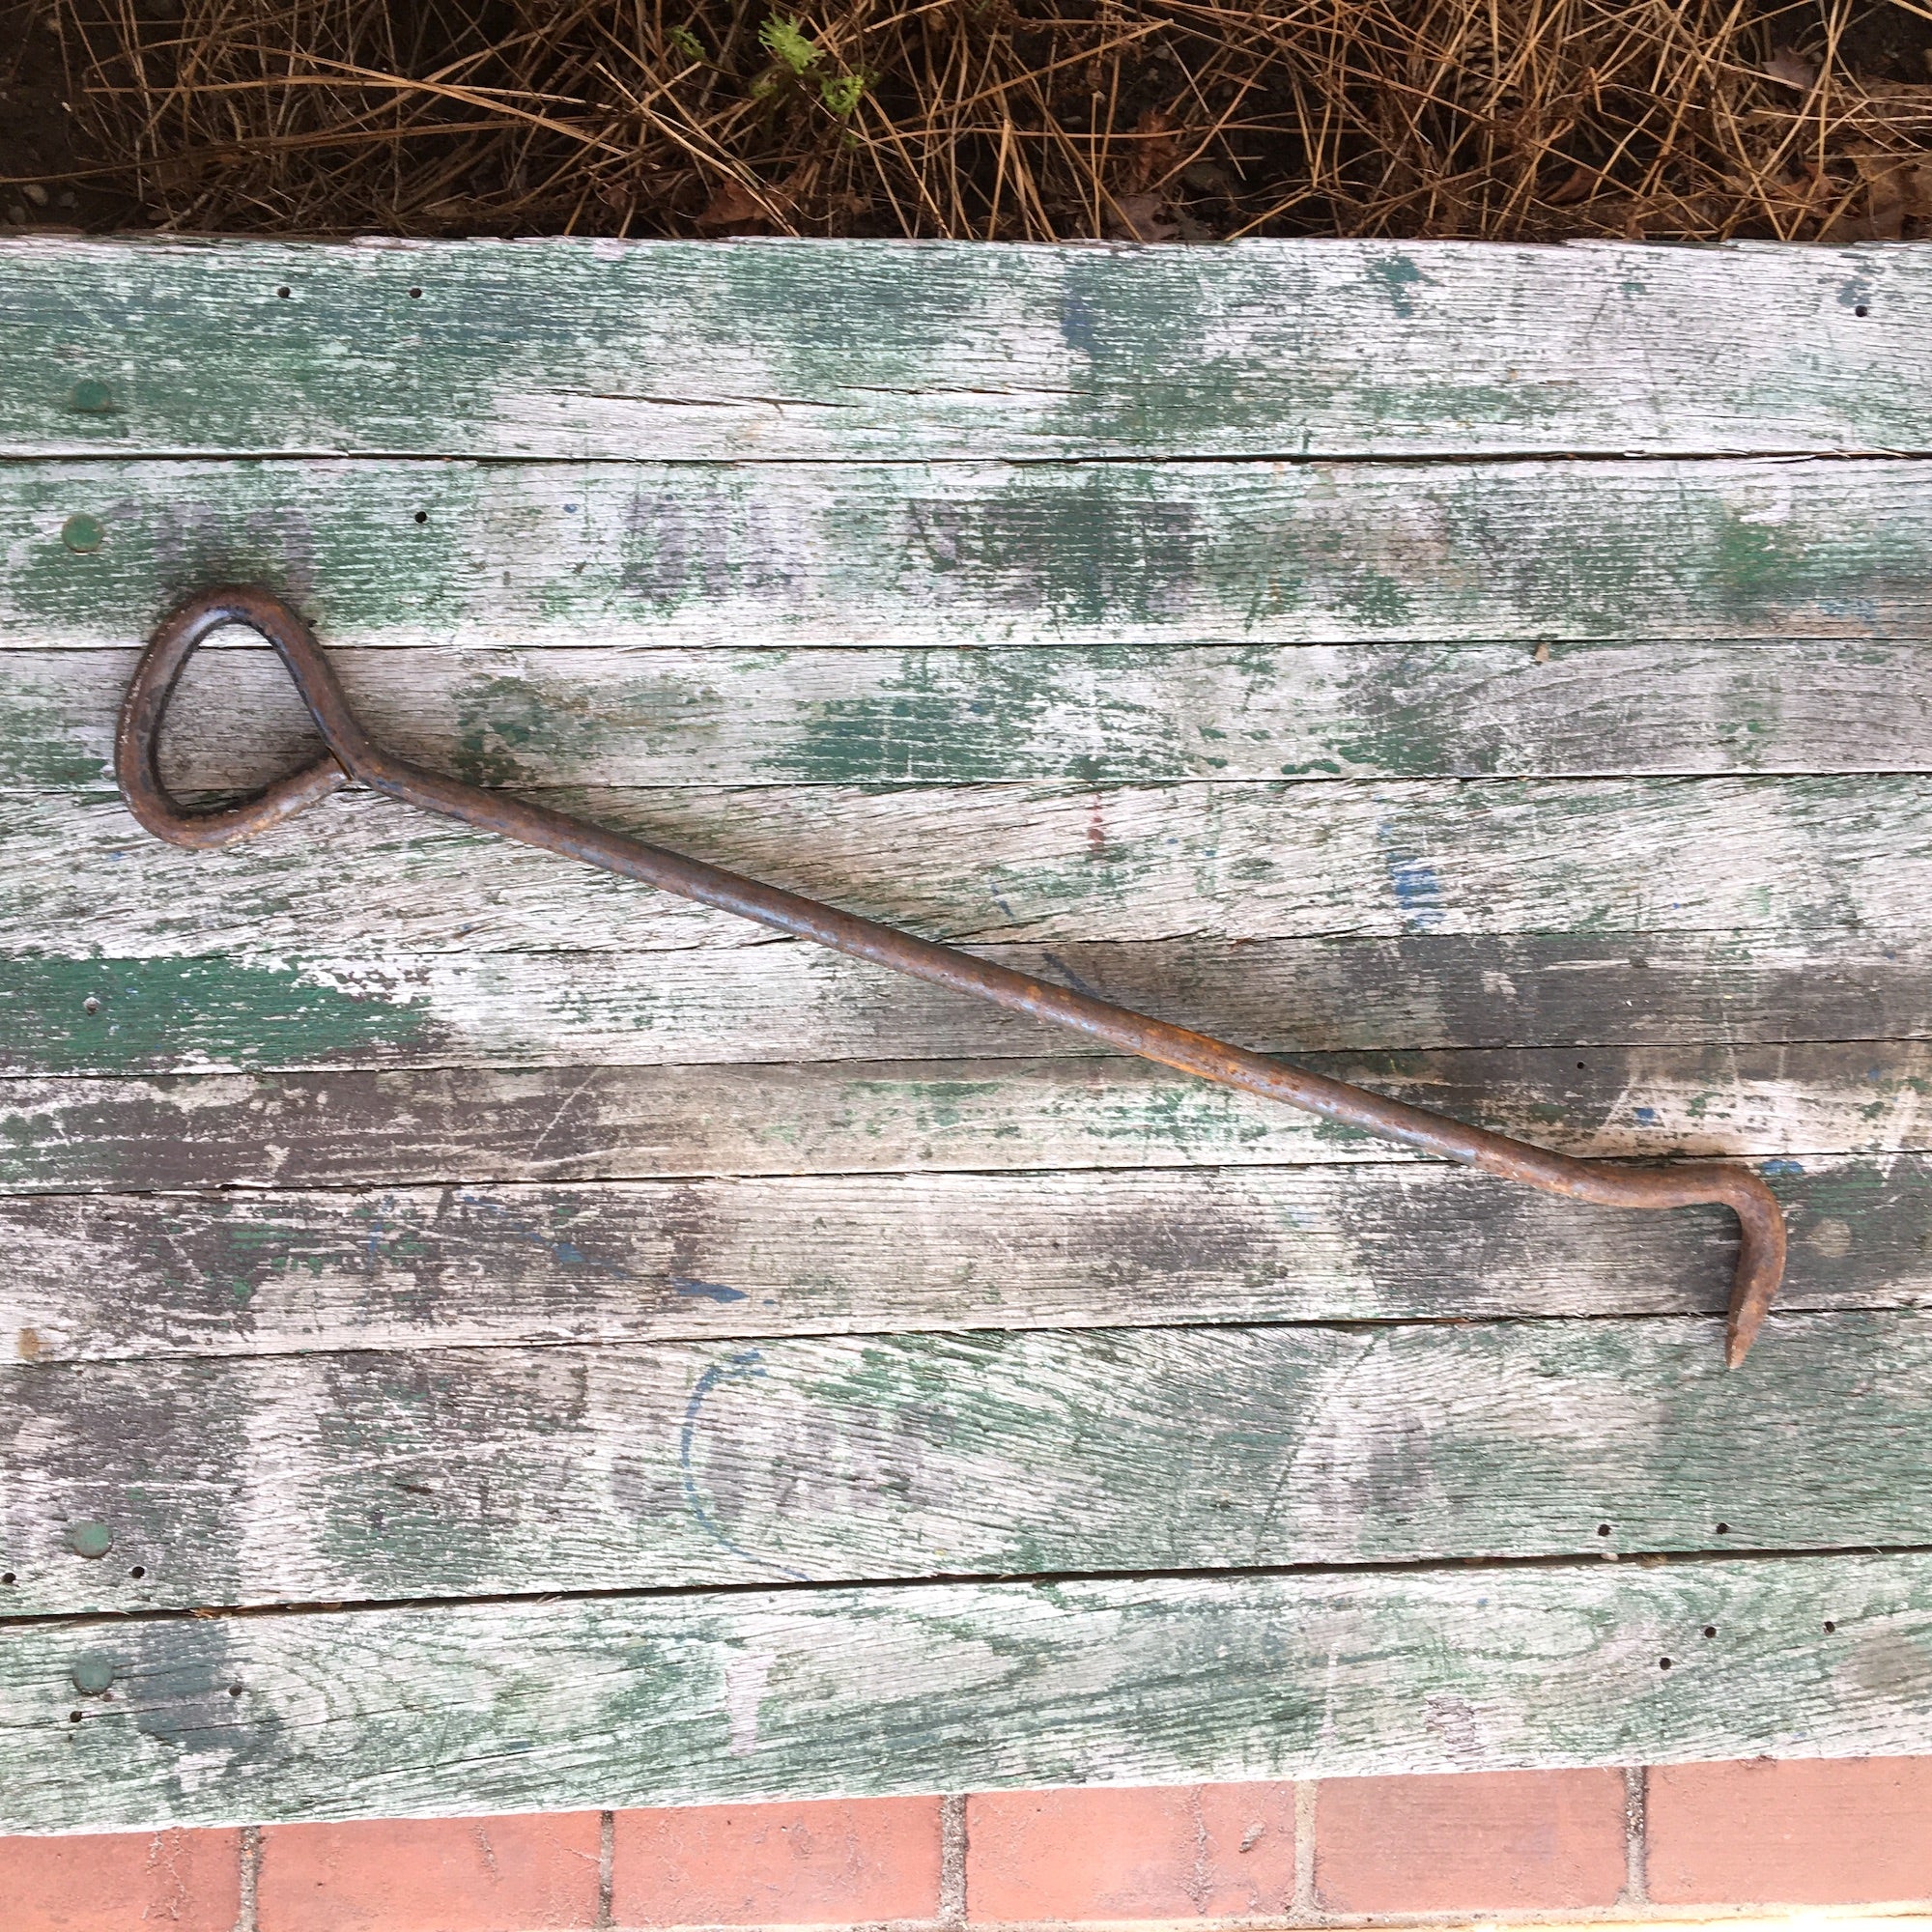 Large Primitive Antique Hand Wrought Forged Iron Hook Farm Door Latch Tool  13.5